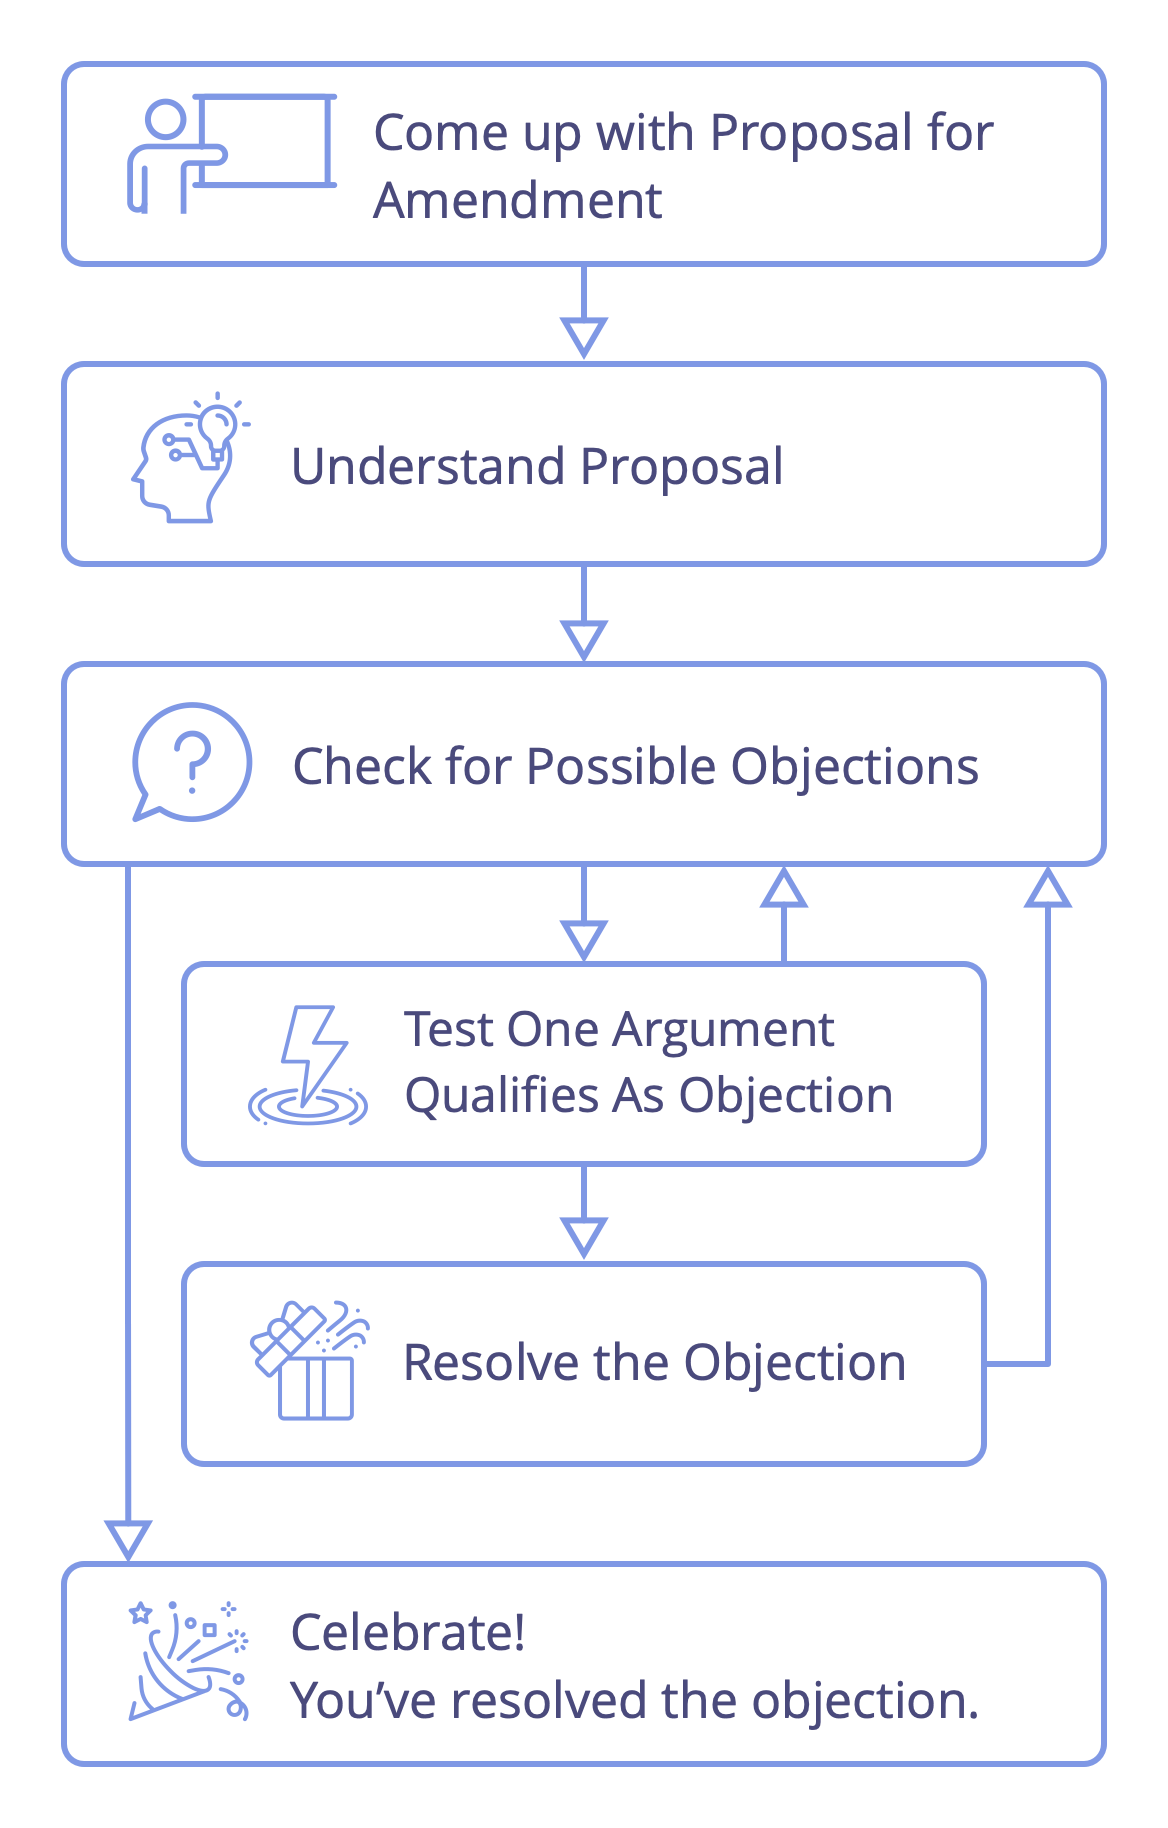 Process for resolving an objection